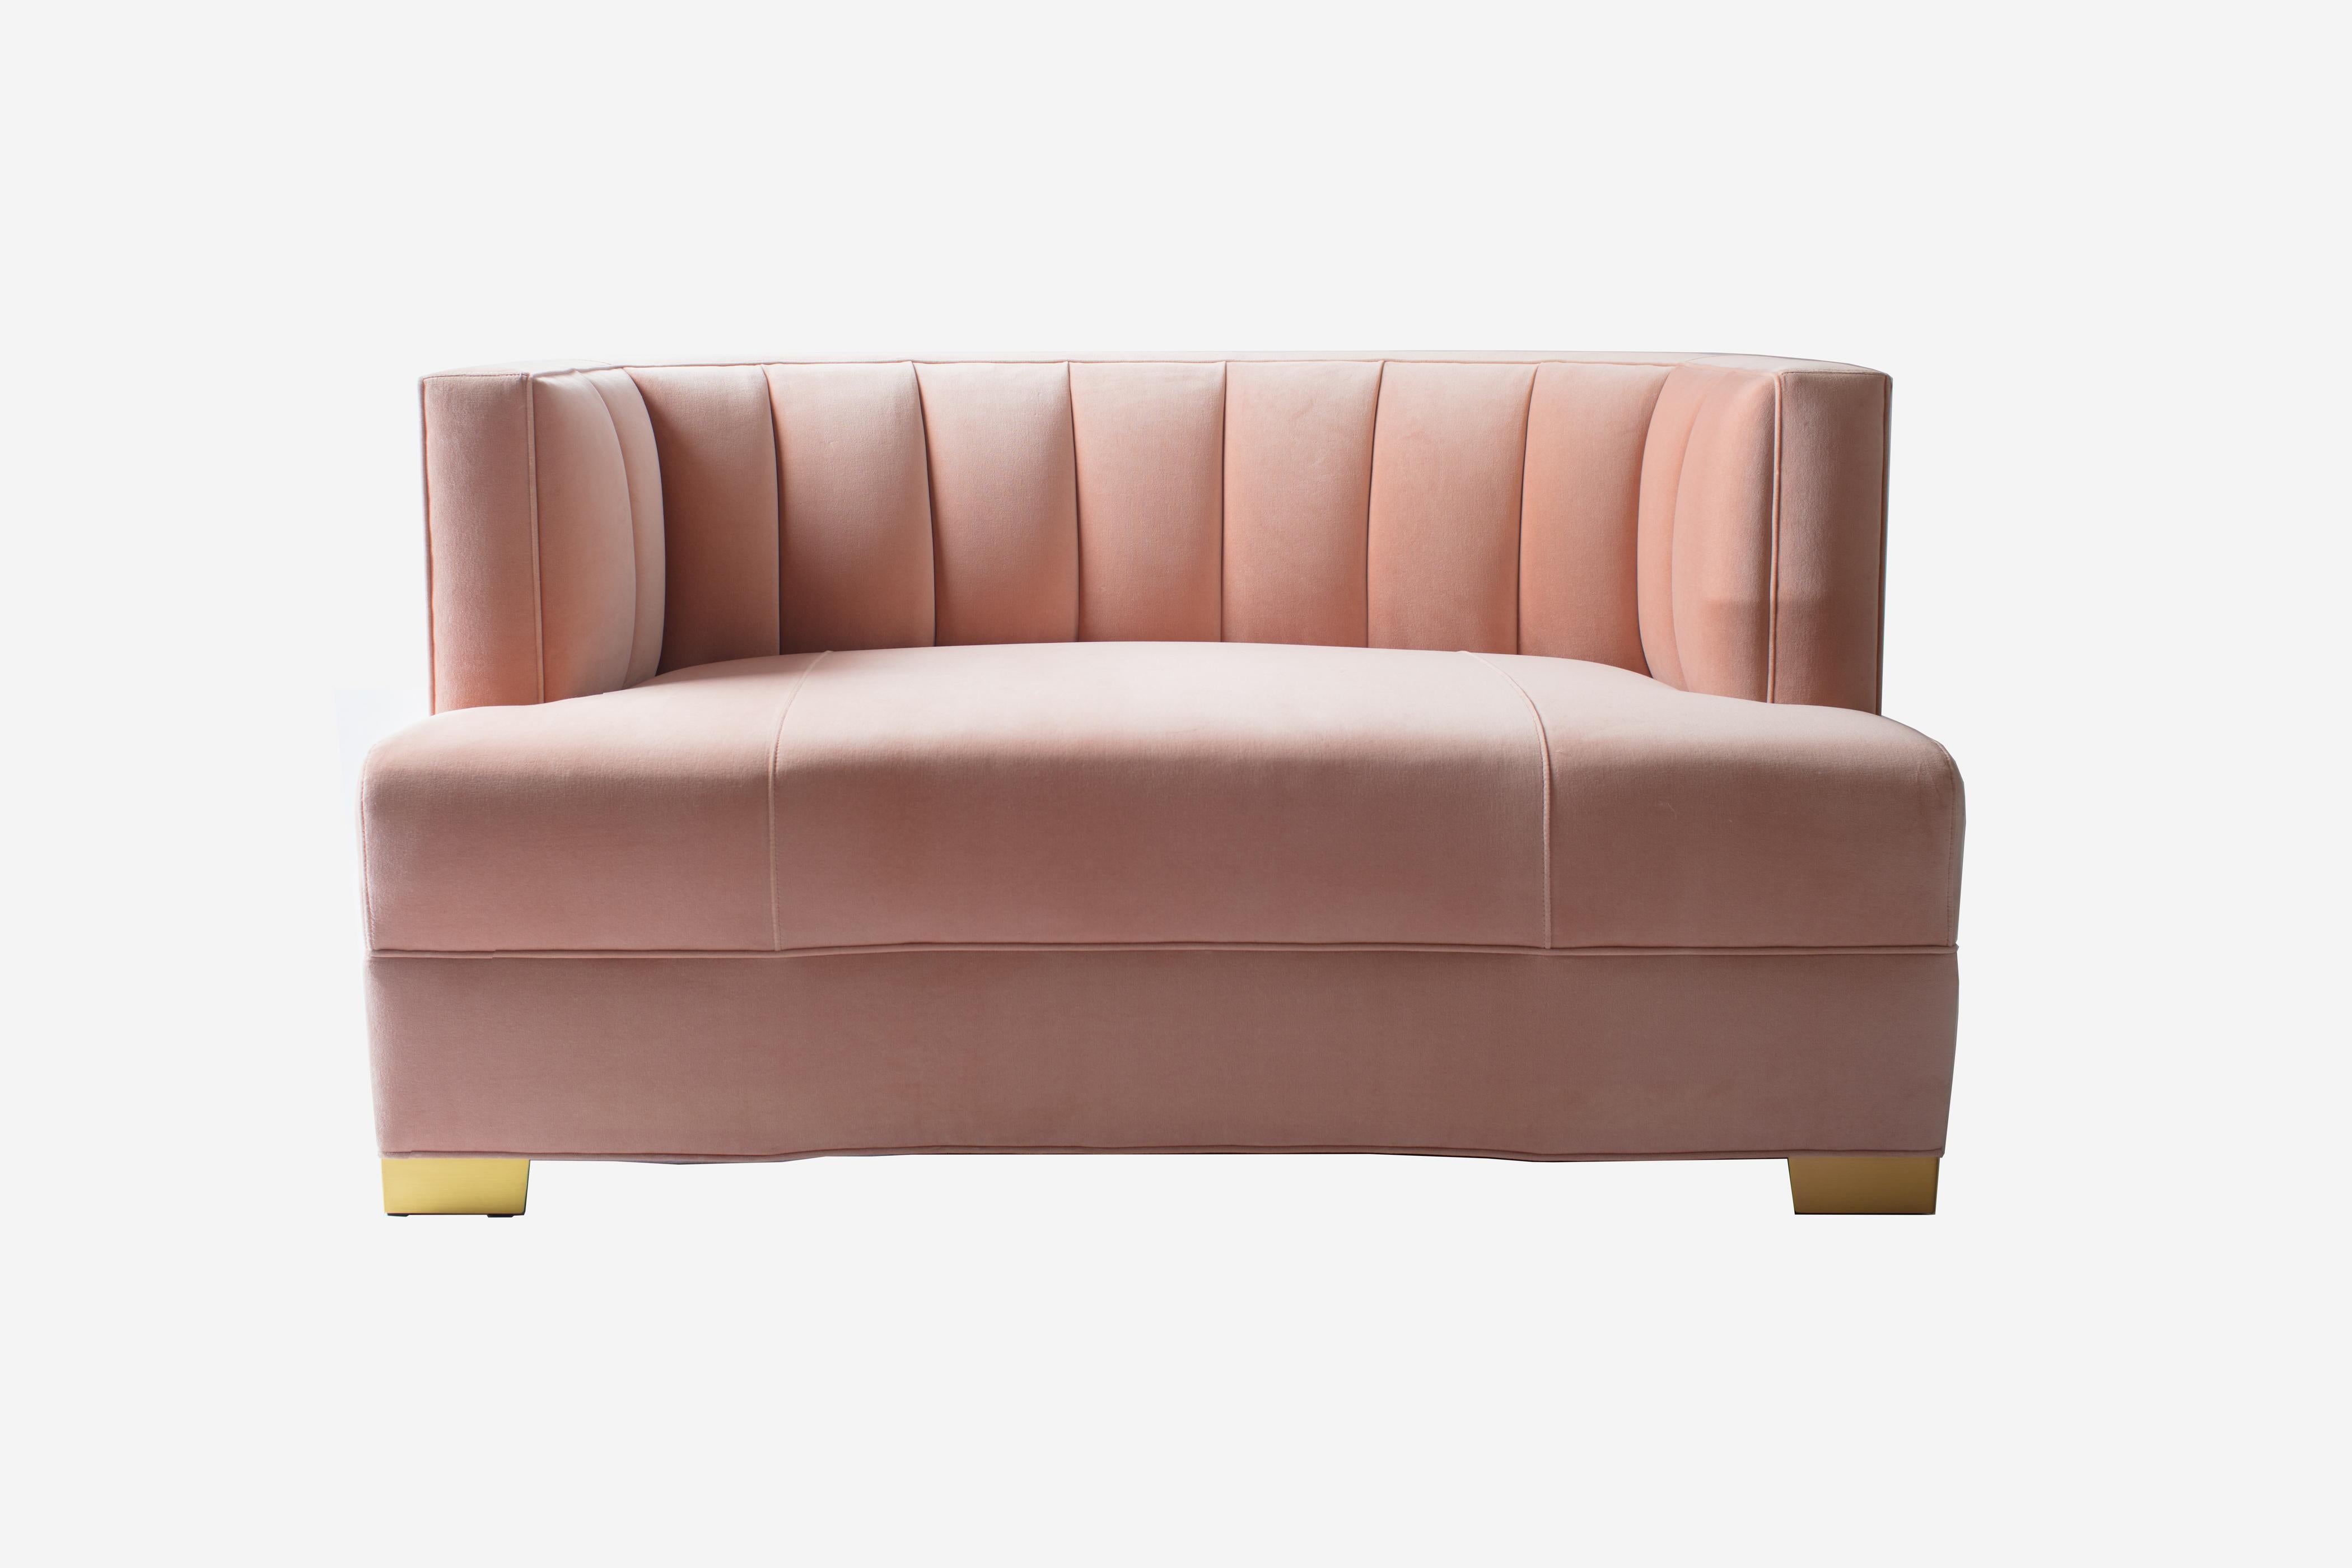 The Alessandra Loveseat is the epitome of beauty. Her contoured back and brushed brass legs add refinement and charm to any space. Pair with the oval Alessandra loveseat ottoman for a sophisticated duo. 

Shown in coral velvet with brushed brass